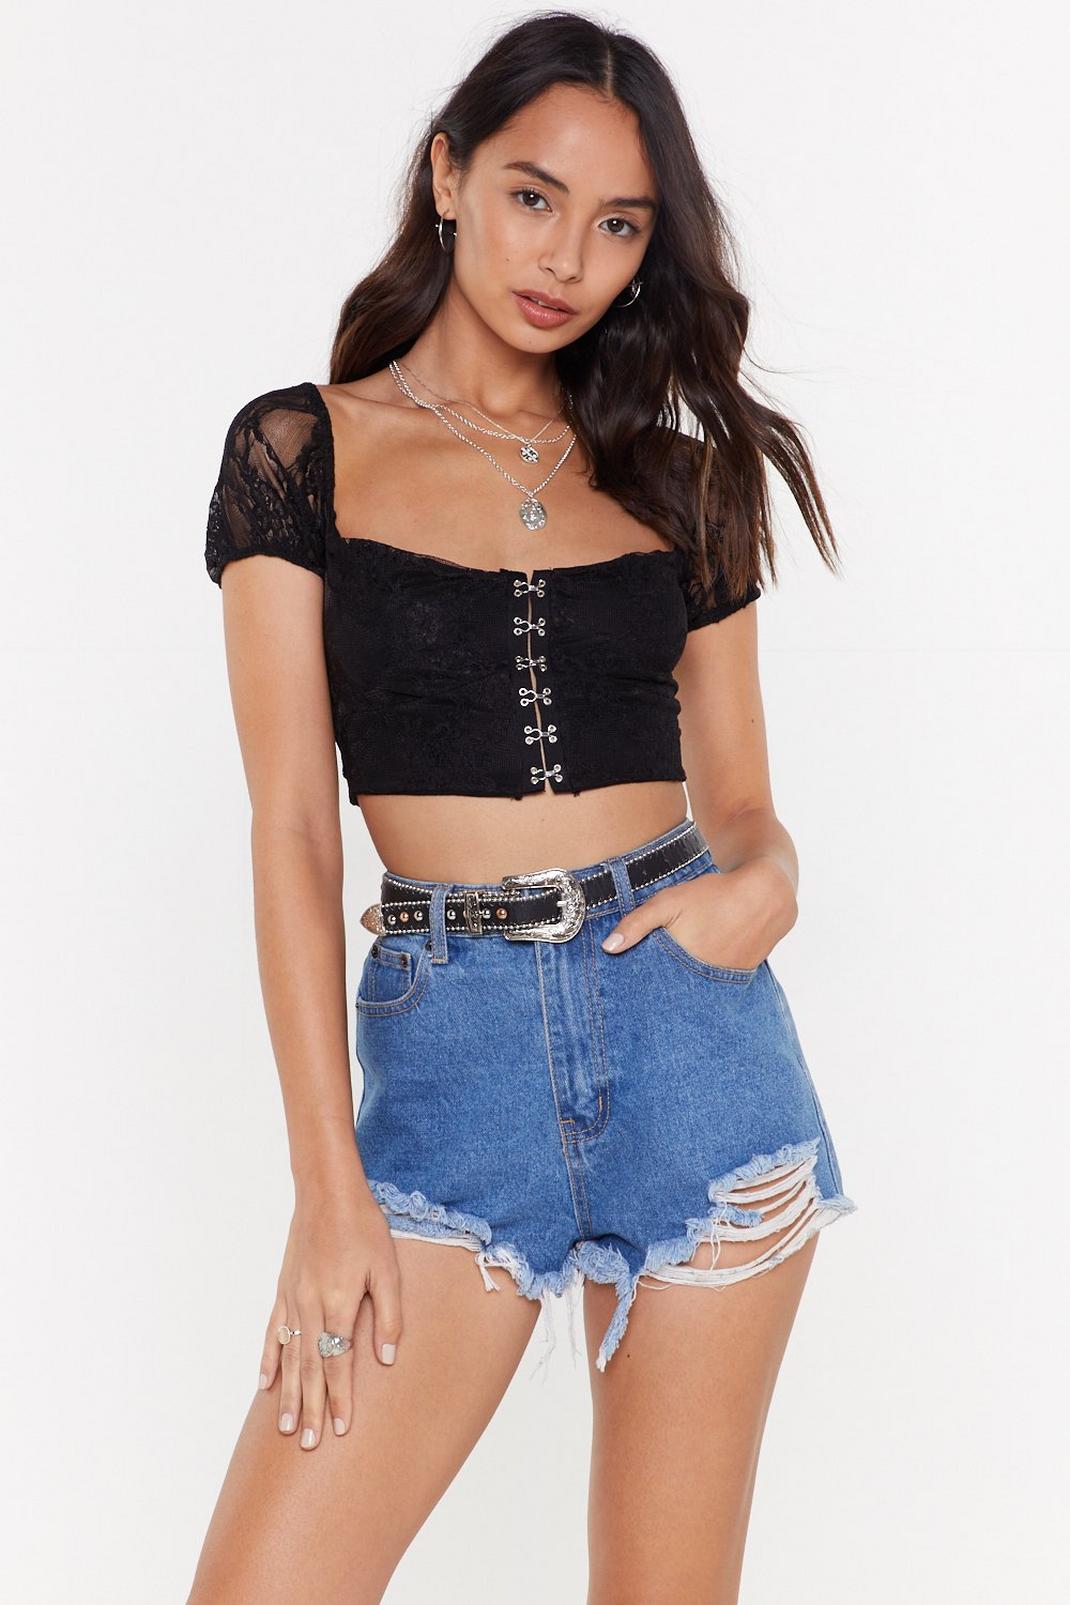 https://media.nastygal.com/i/nastygal/agg69892_black_xl/female-black-hooked-on-you-hook-and-eye-lace-crop-top/?w=1070&qlt=default&fmt.jp2.qlt=70&fmt=auto&sm=fit